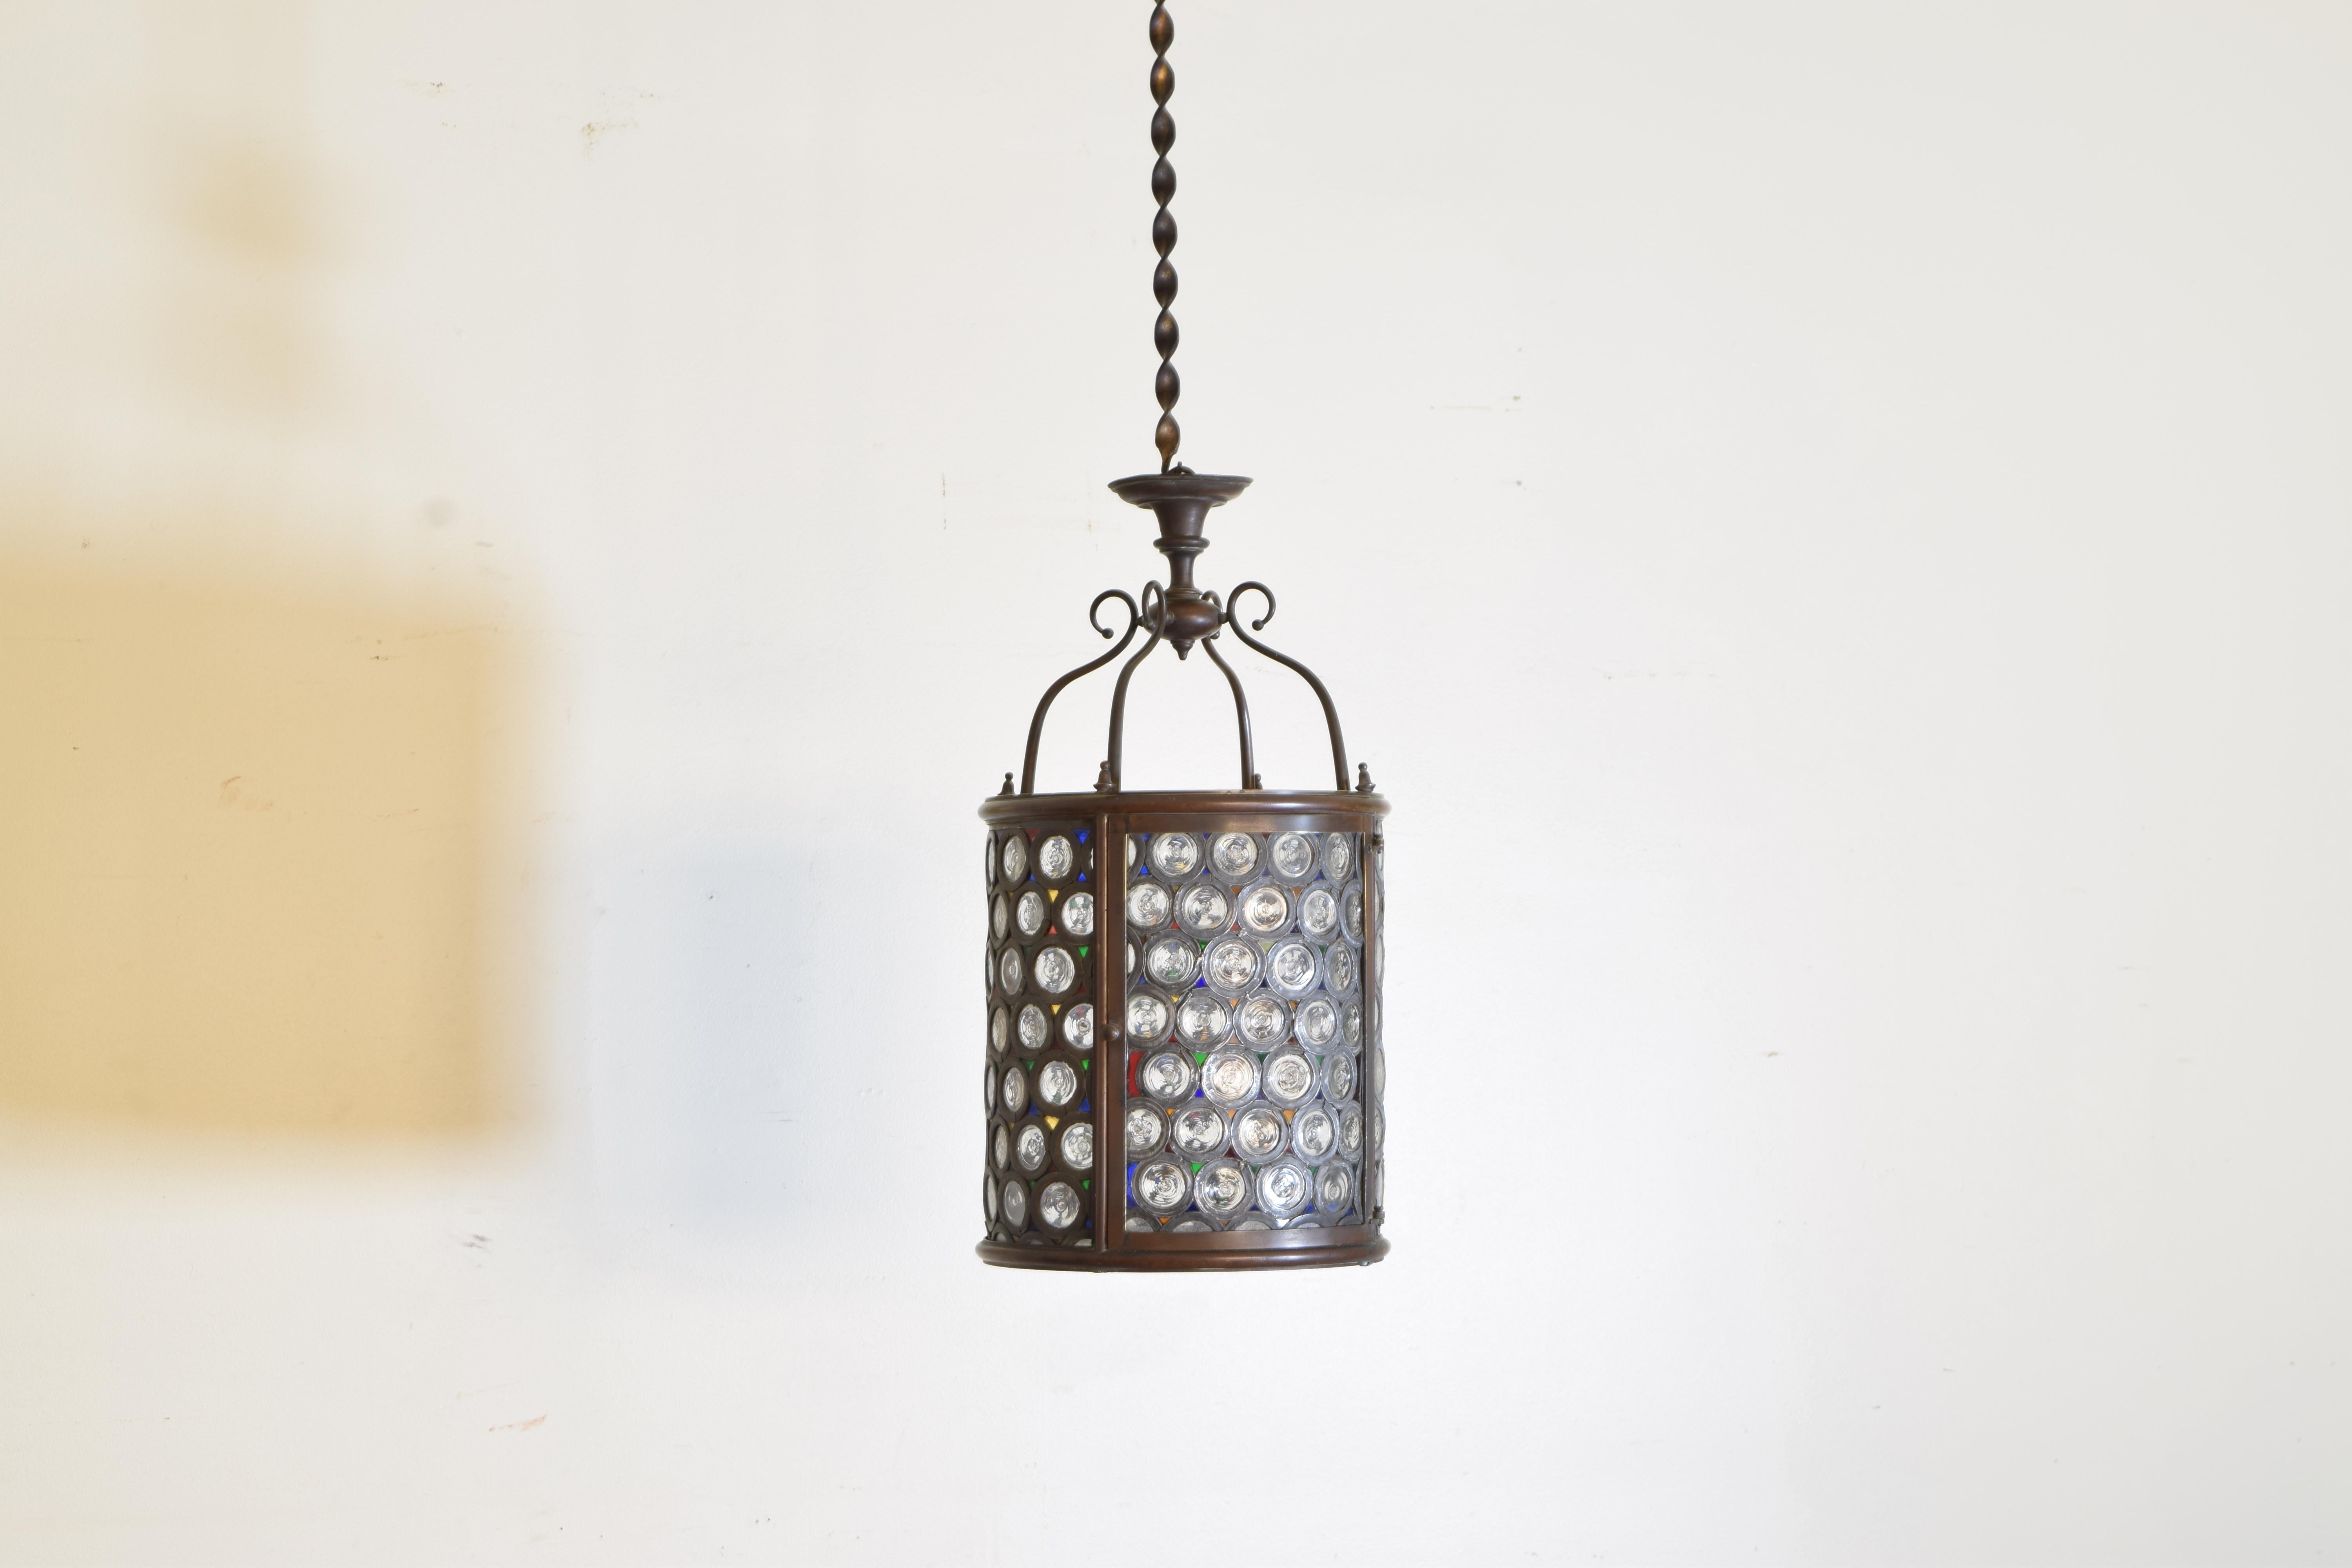 From the second half of the 19th century this circular lantern has a frame constructed of patinated brass with one hinged door, the surfaces all composed of circular colored discs within lead framework, currently unwired but can be wired to suit.